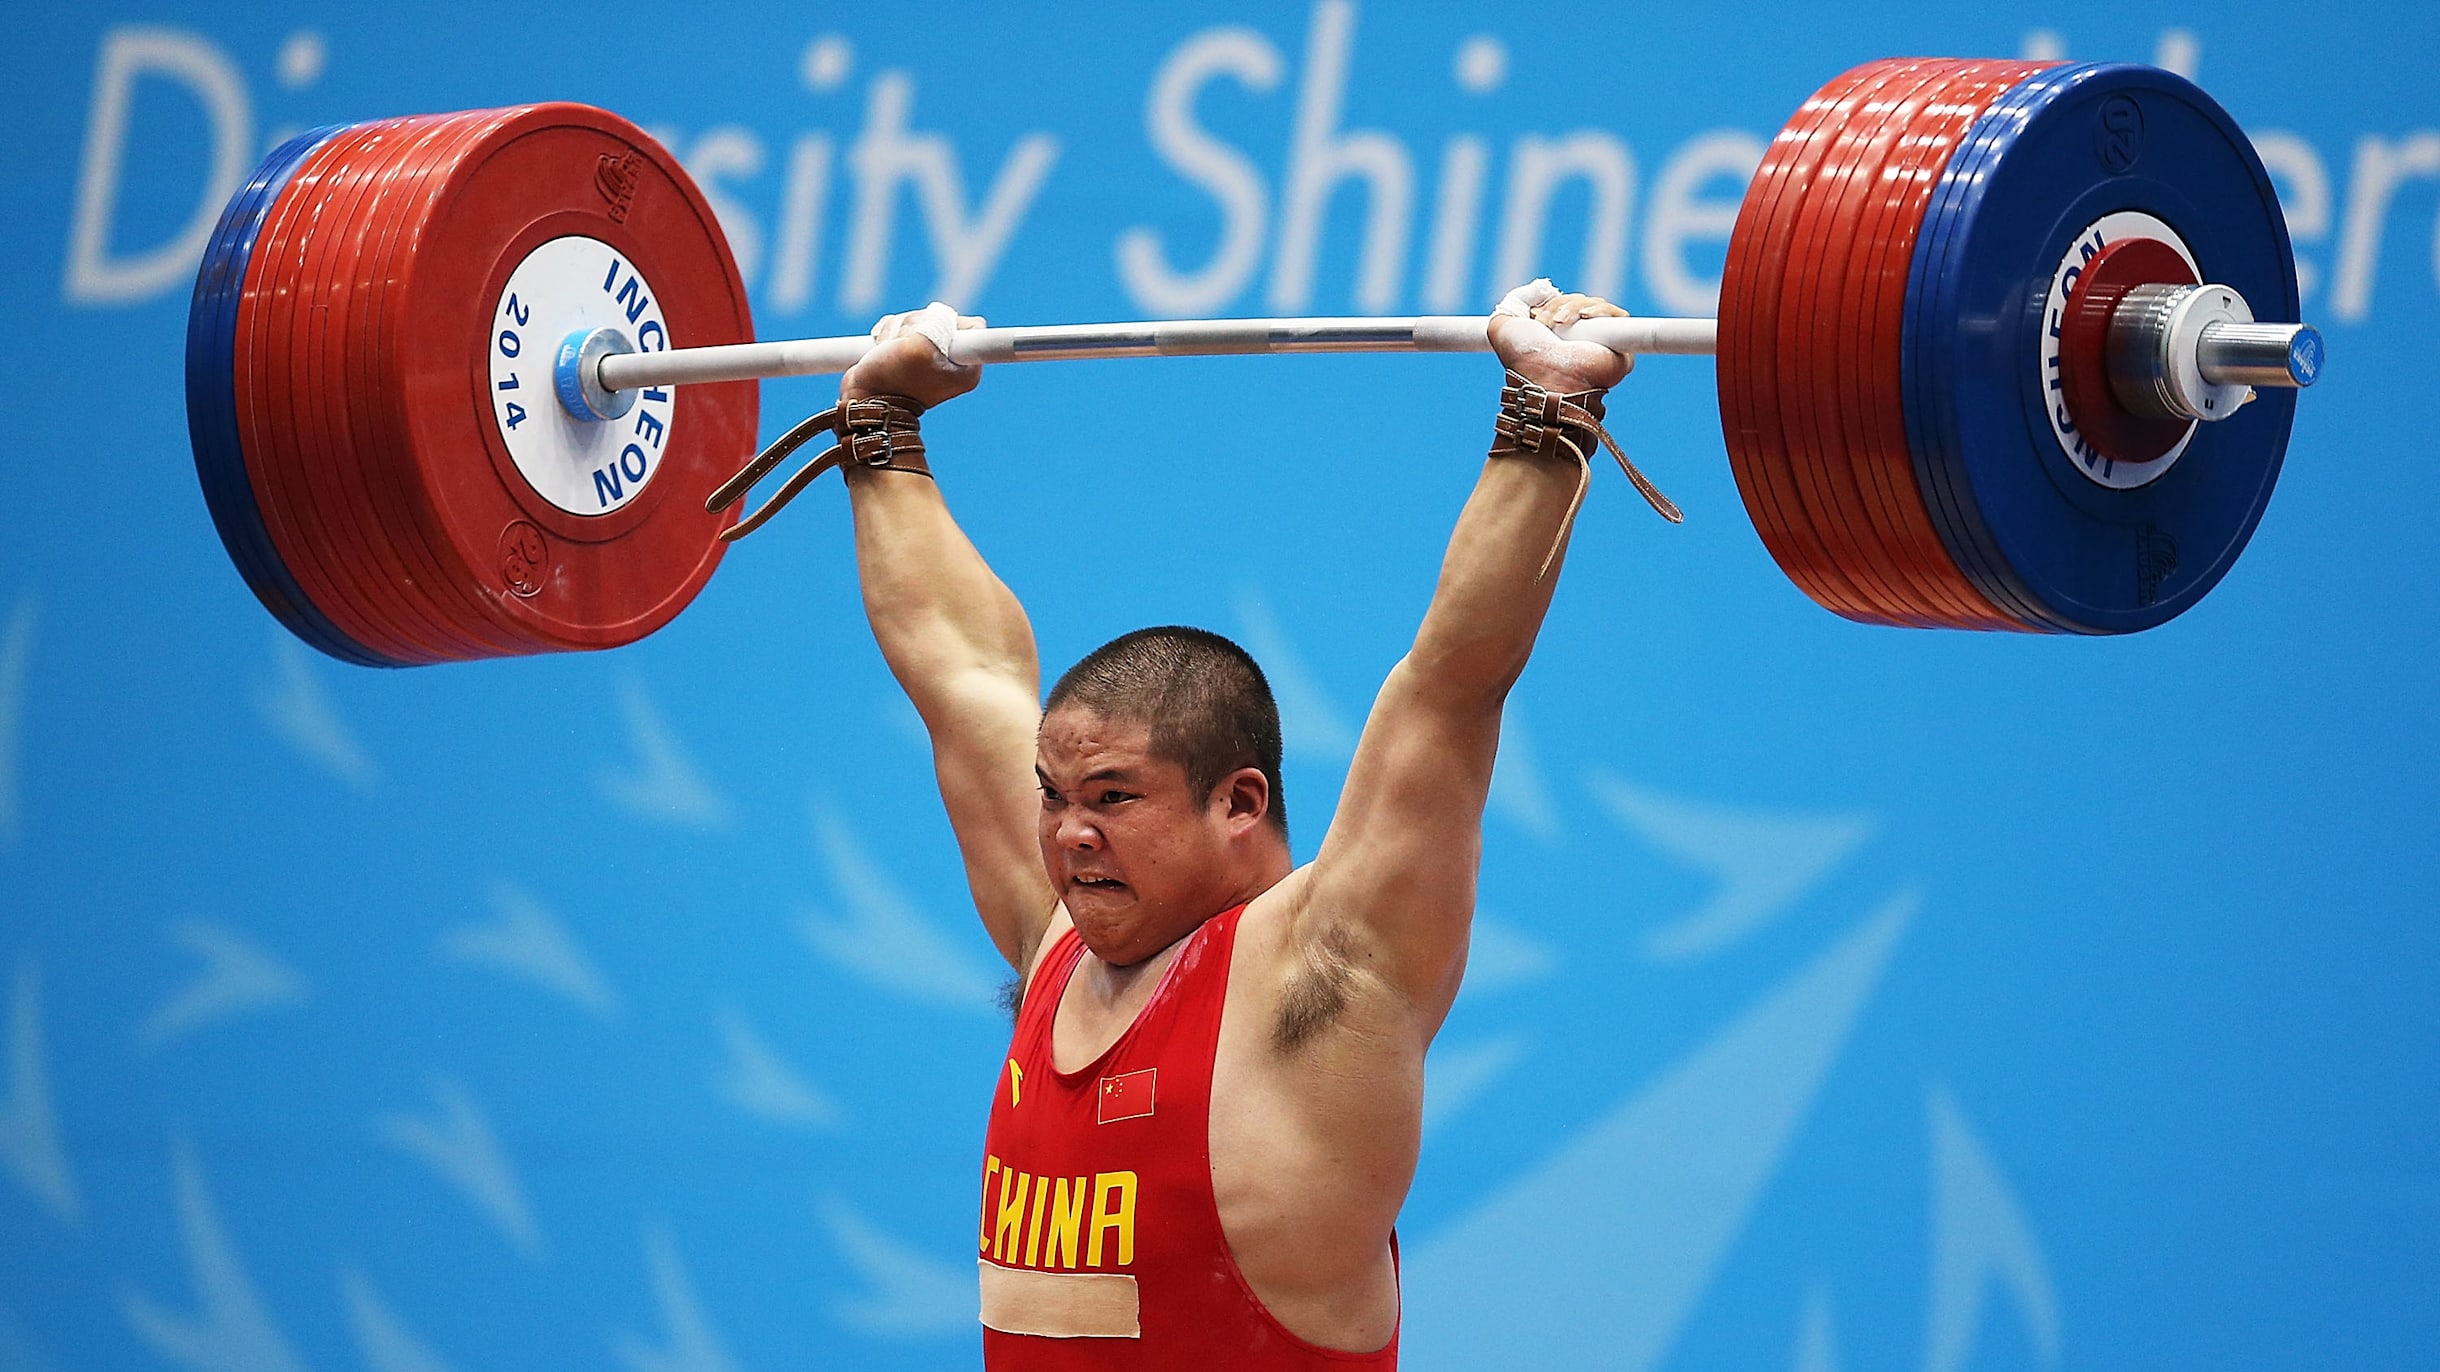 Weightlifting From rules to records, all you need to know